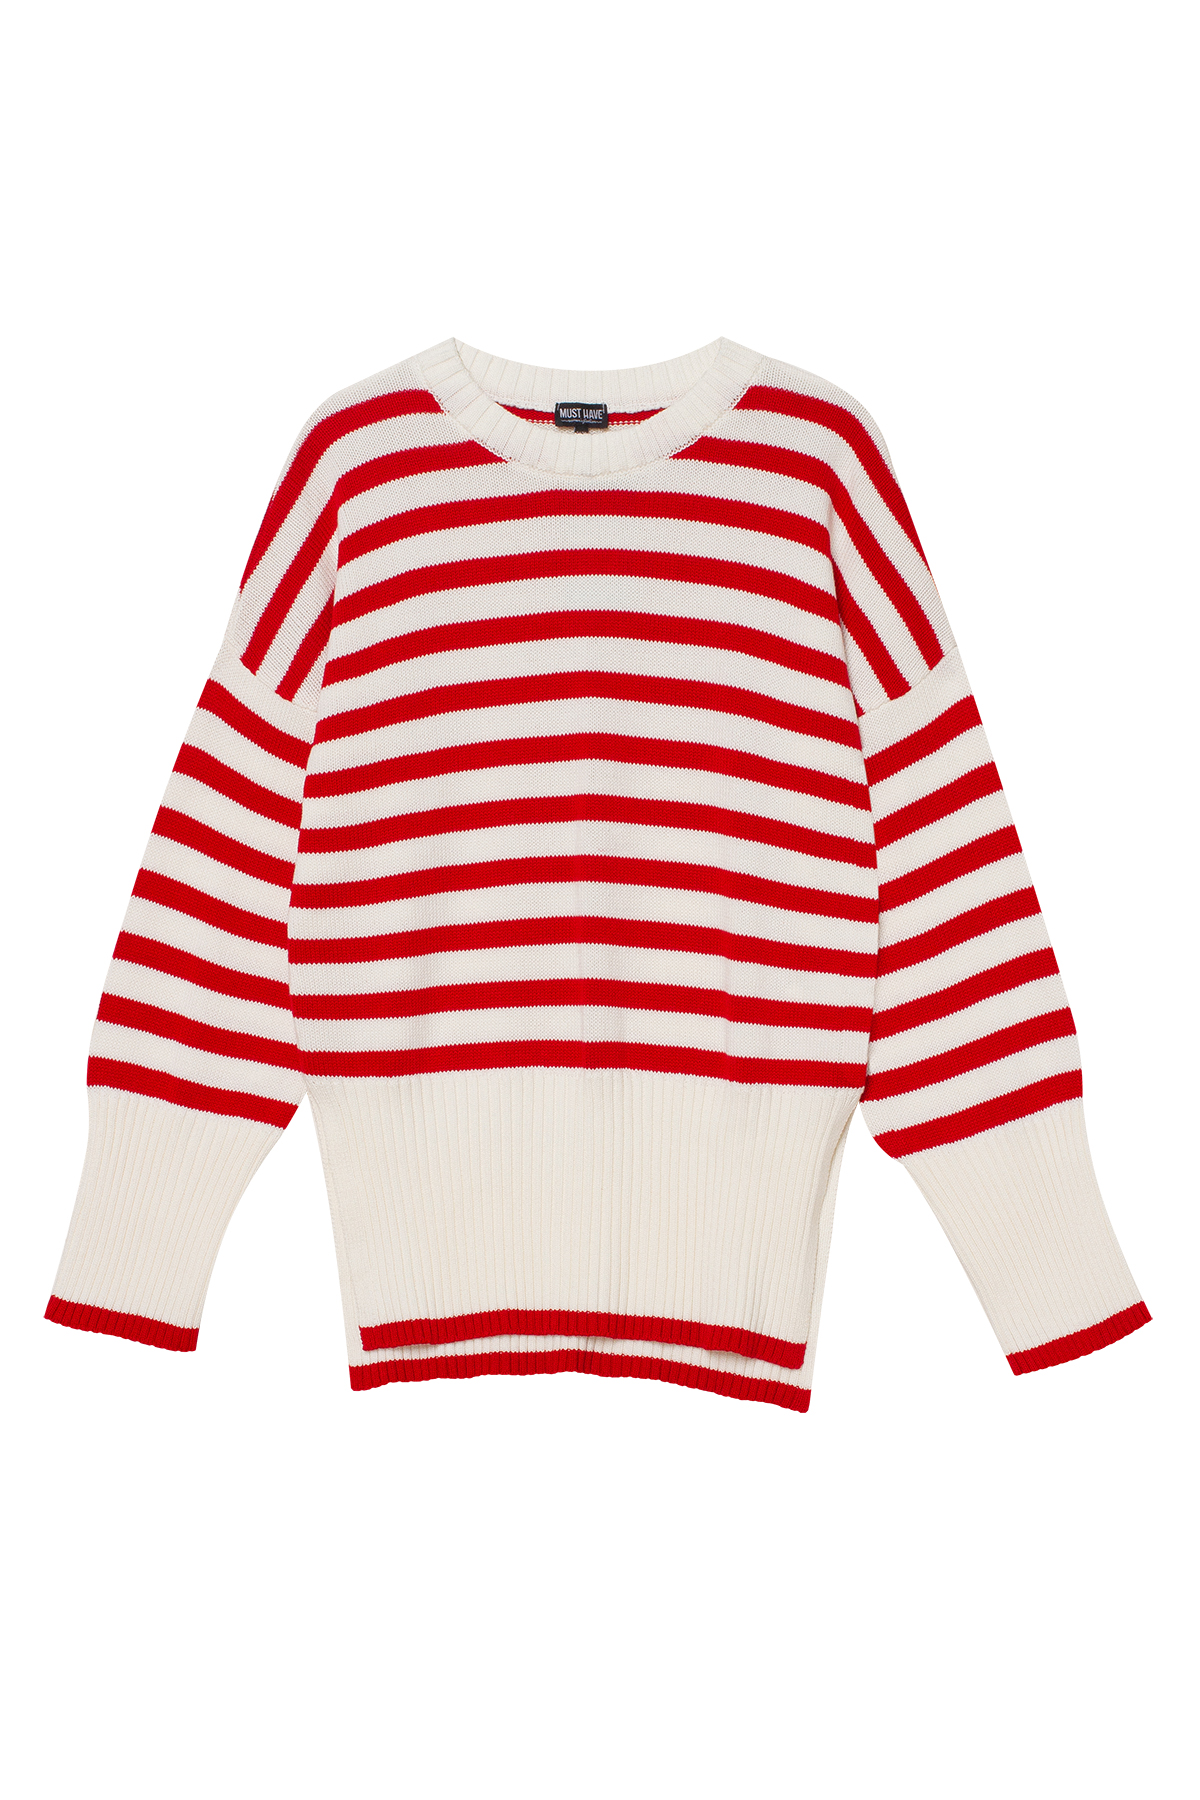 Sweater with milk cotton in red stripes, photo 6